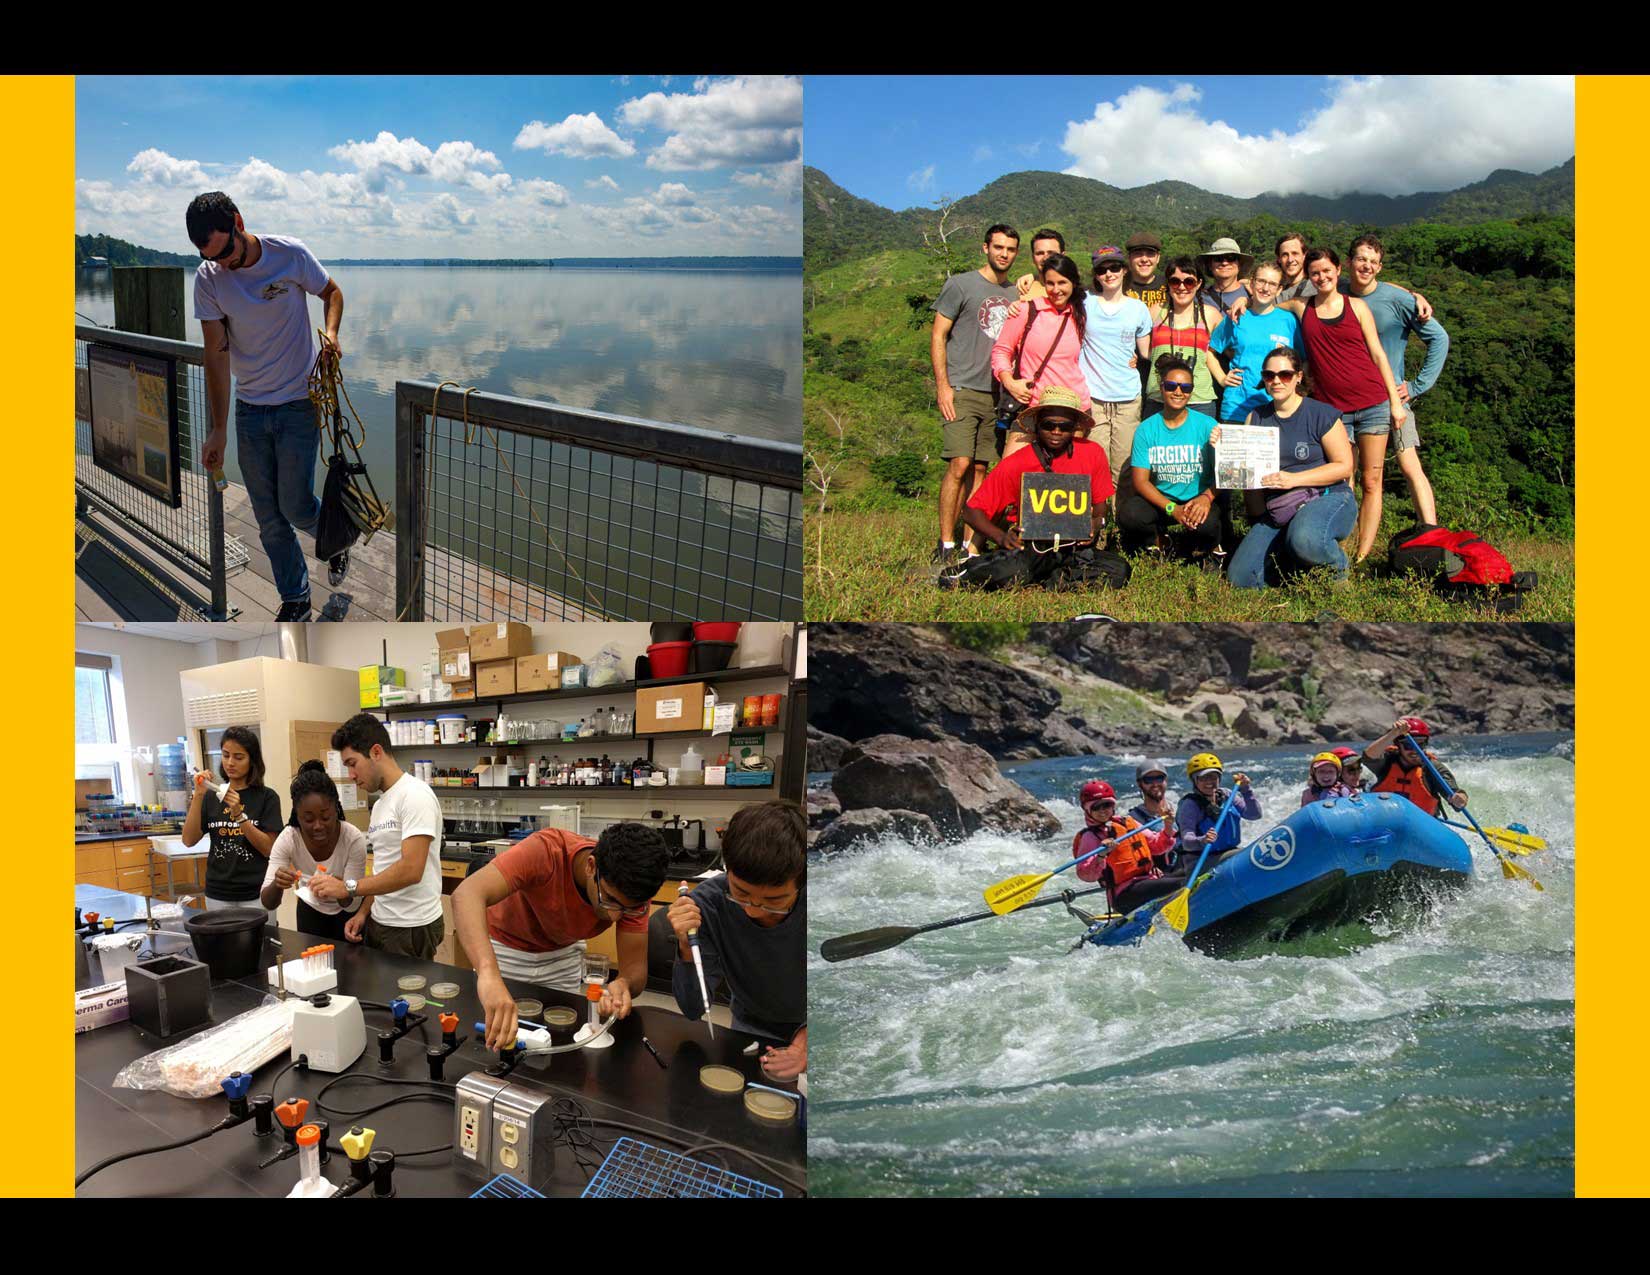 four scenes: a person standing on a pier overlooking a body of water, a v.c.u. student group posing outside in a mountainous area, students working in a lab, and a group of people whitewater rafting